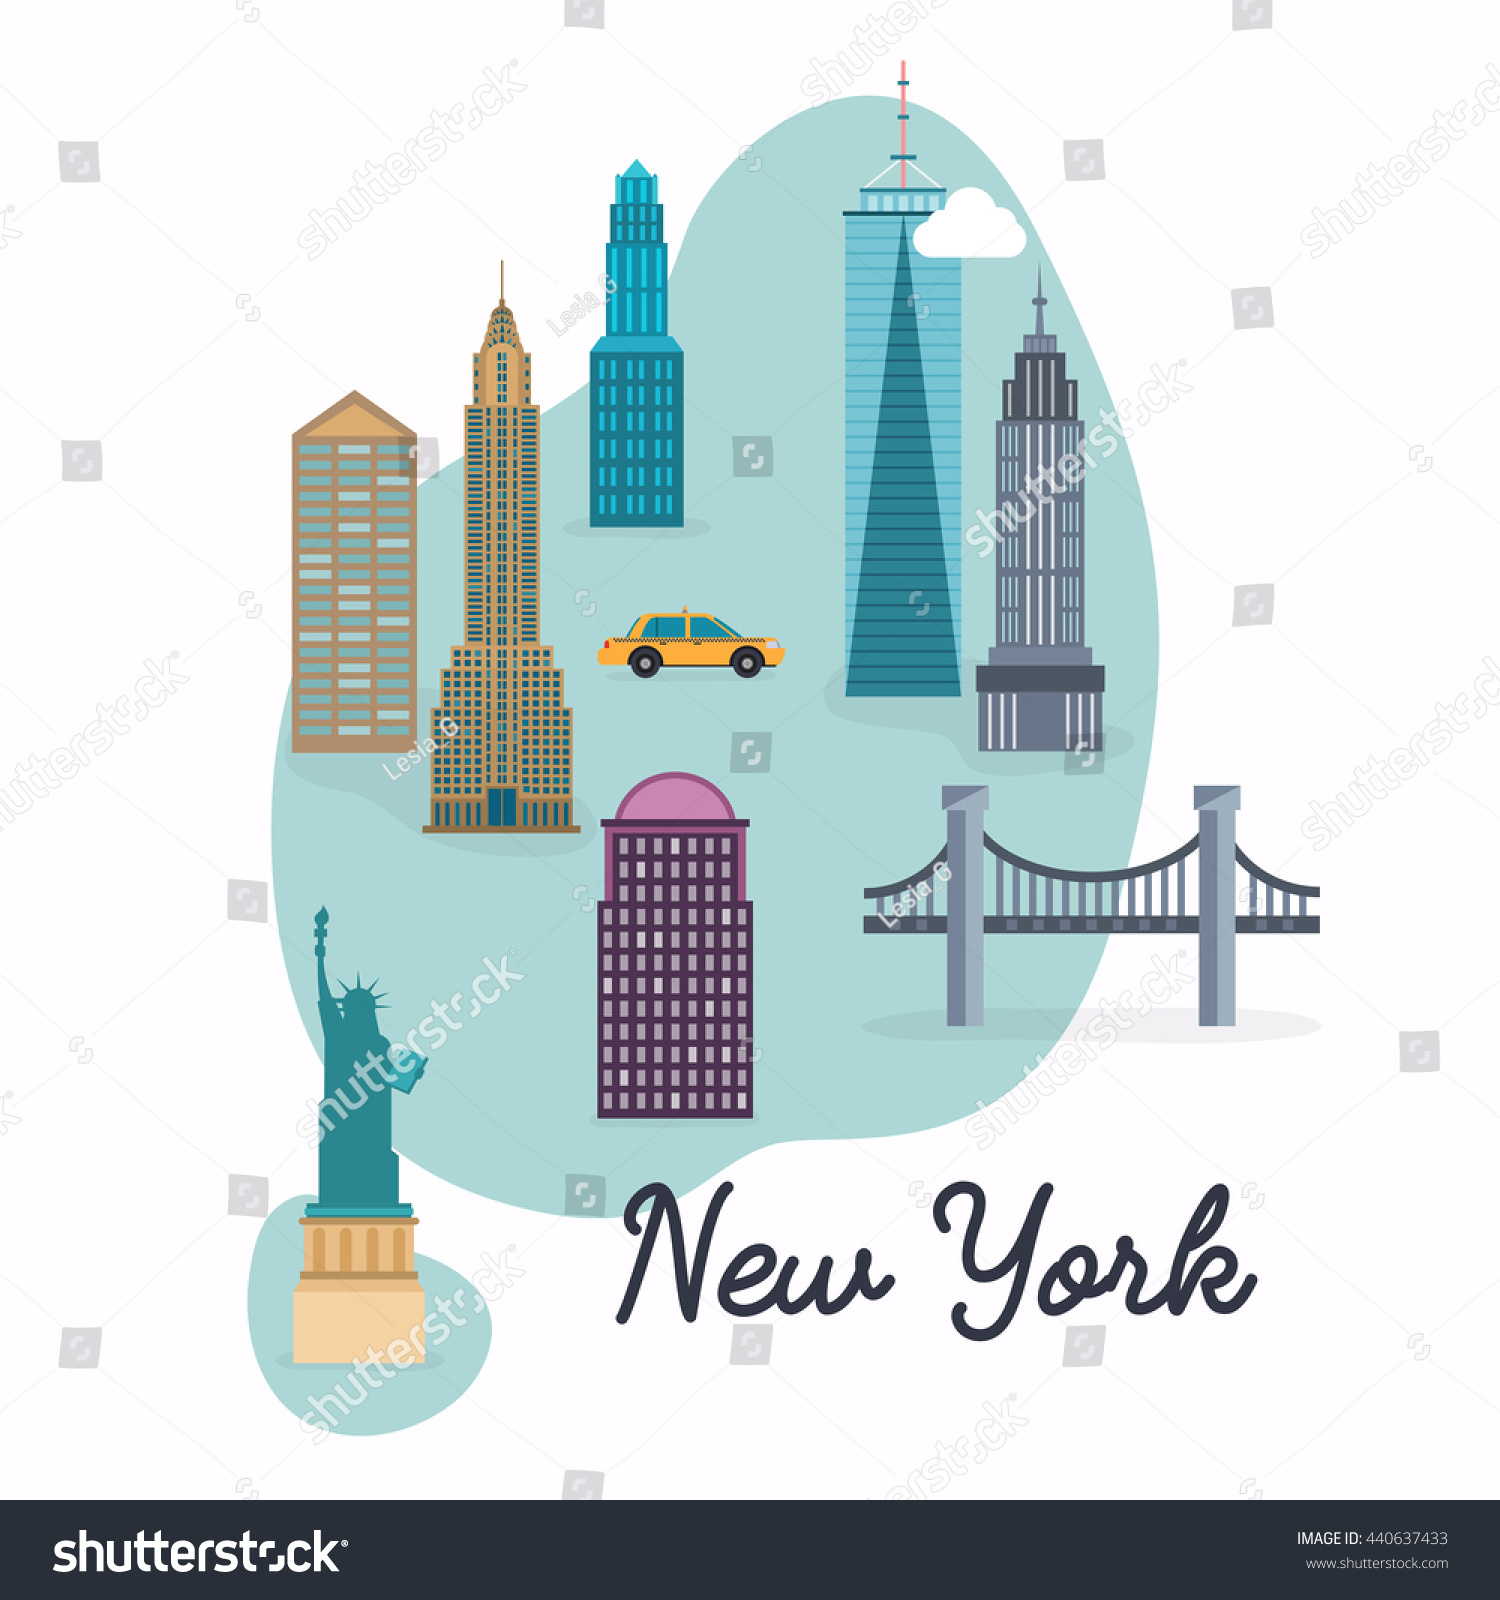 SVG of New York City. Travel map and vector landscape of buildings and famous landmarks. Vector illustration. svg